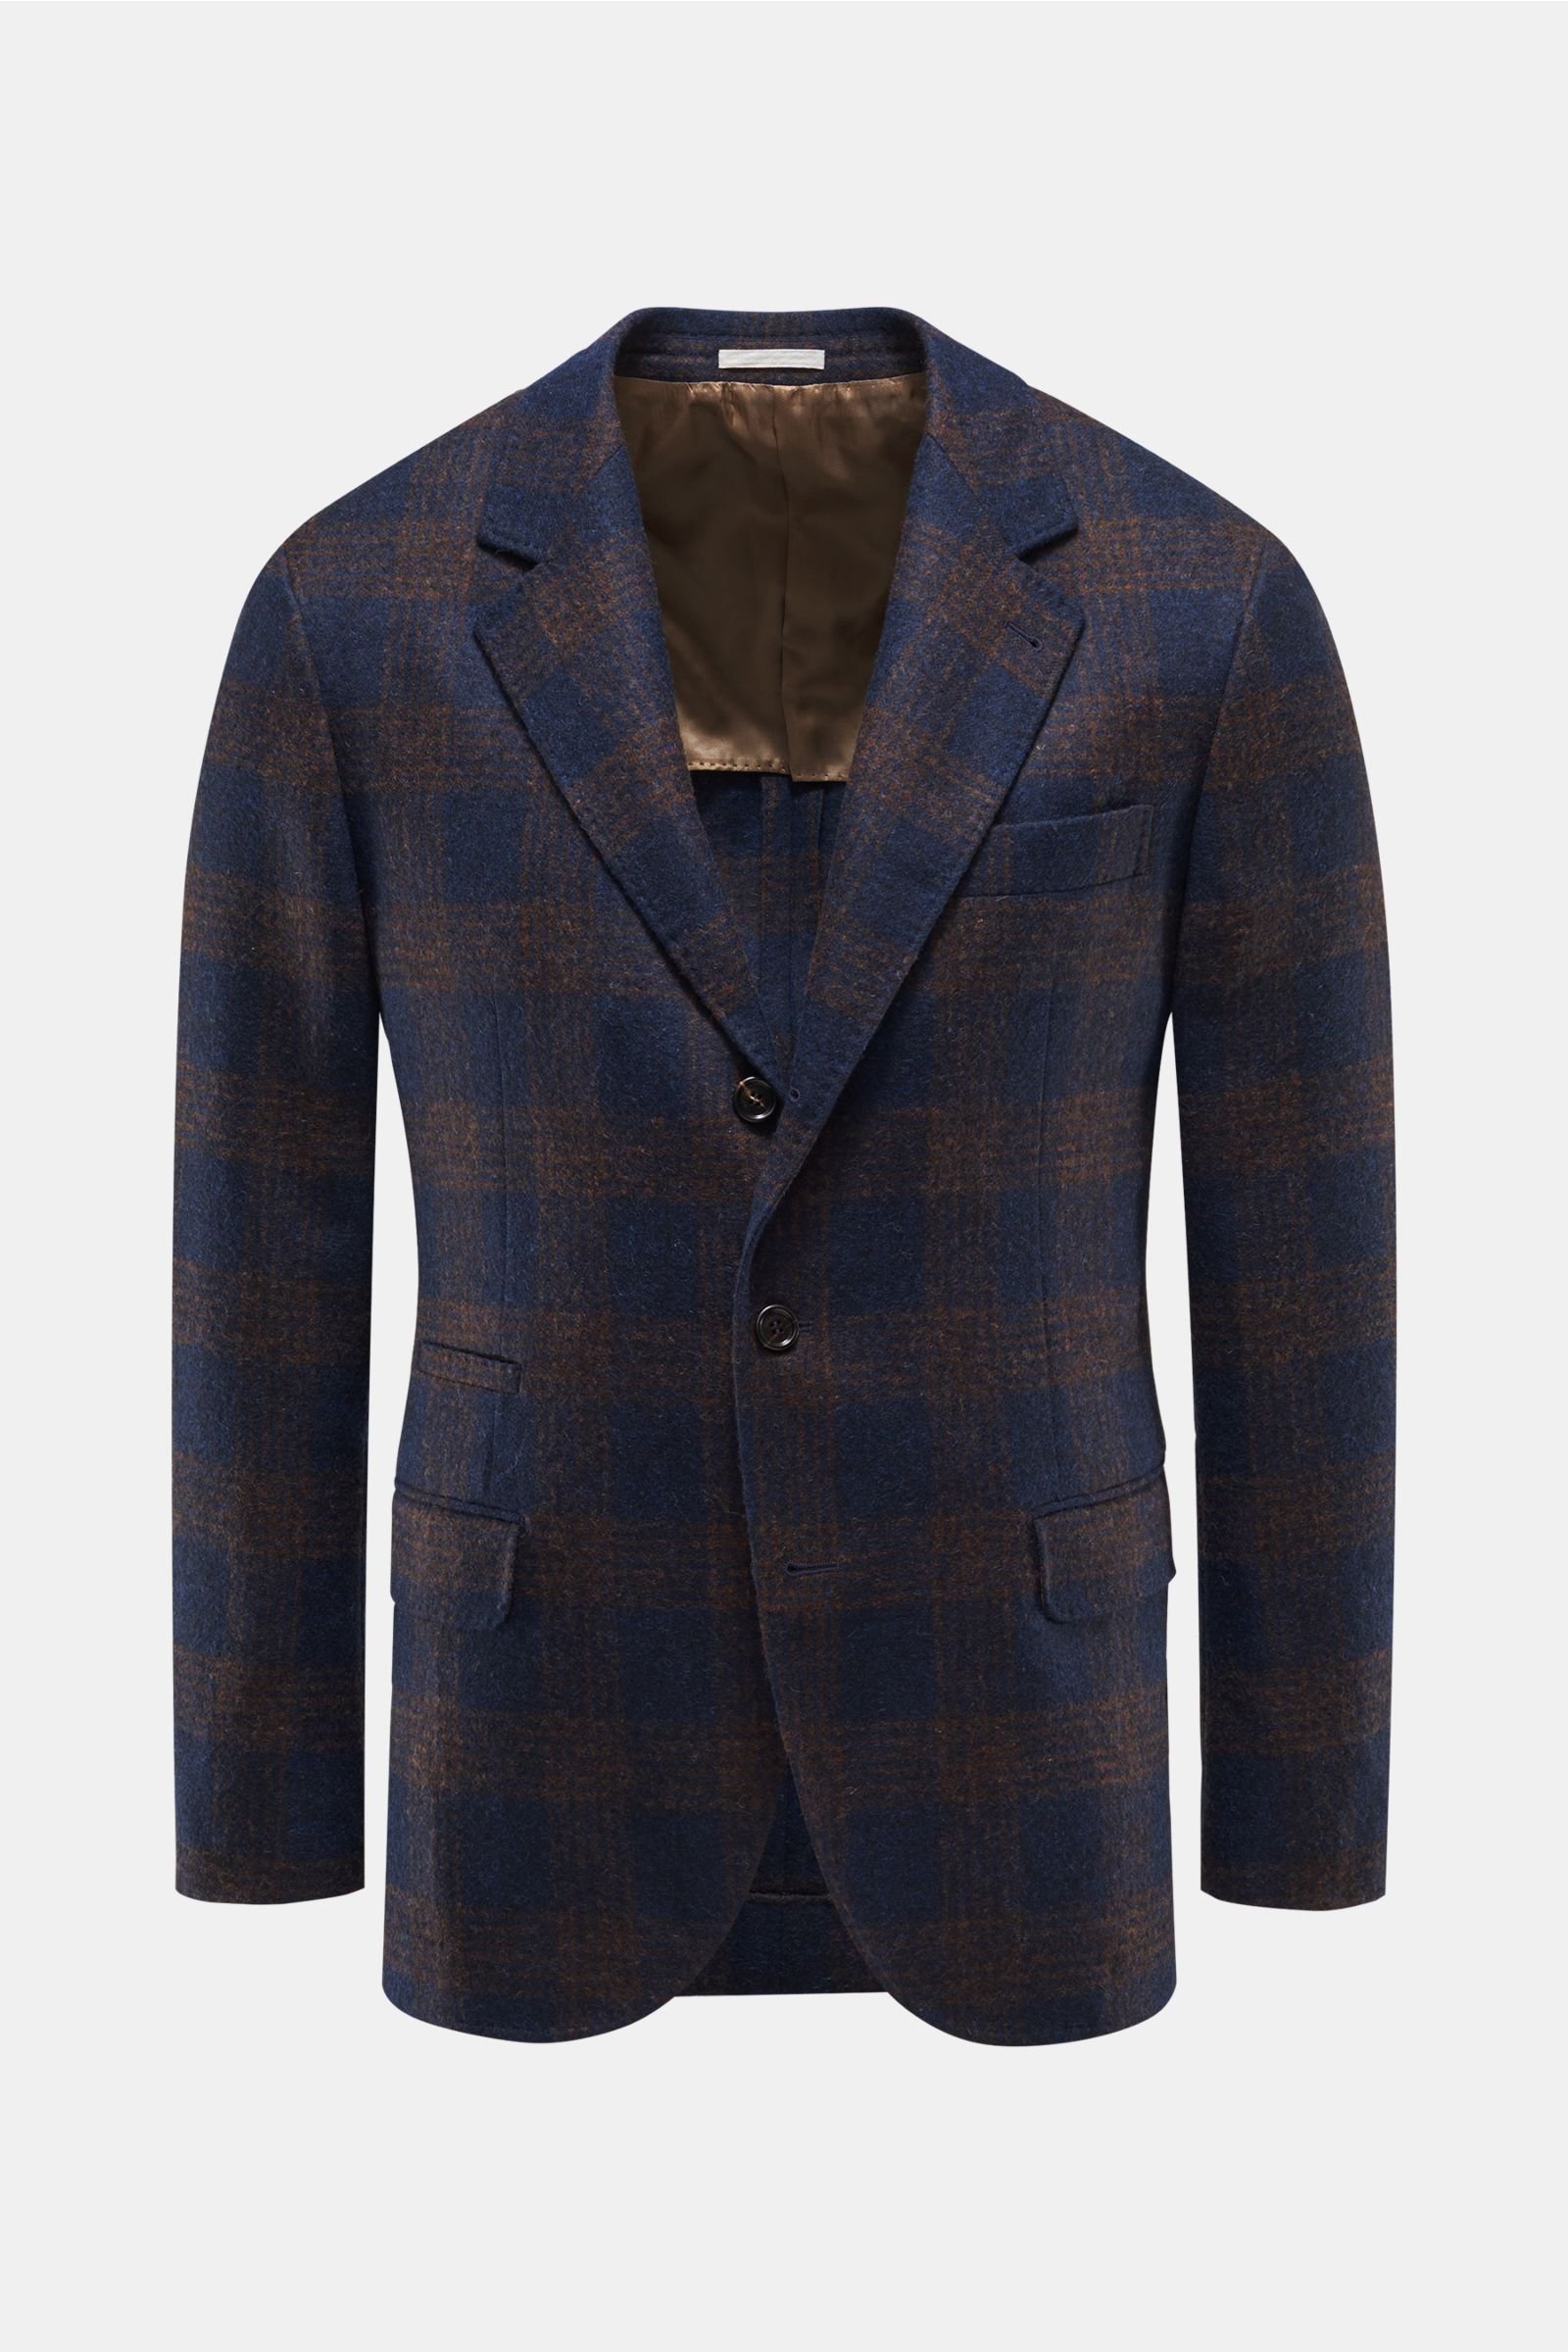 Smart-casual jacket navy/brown checked